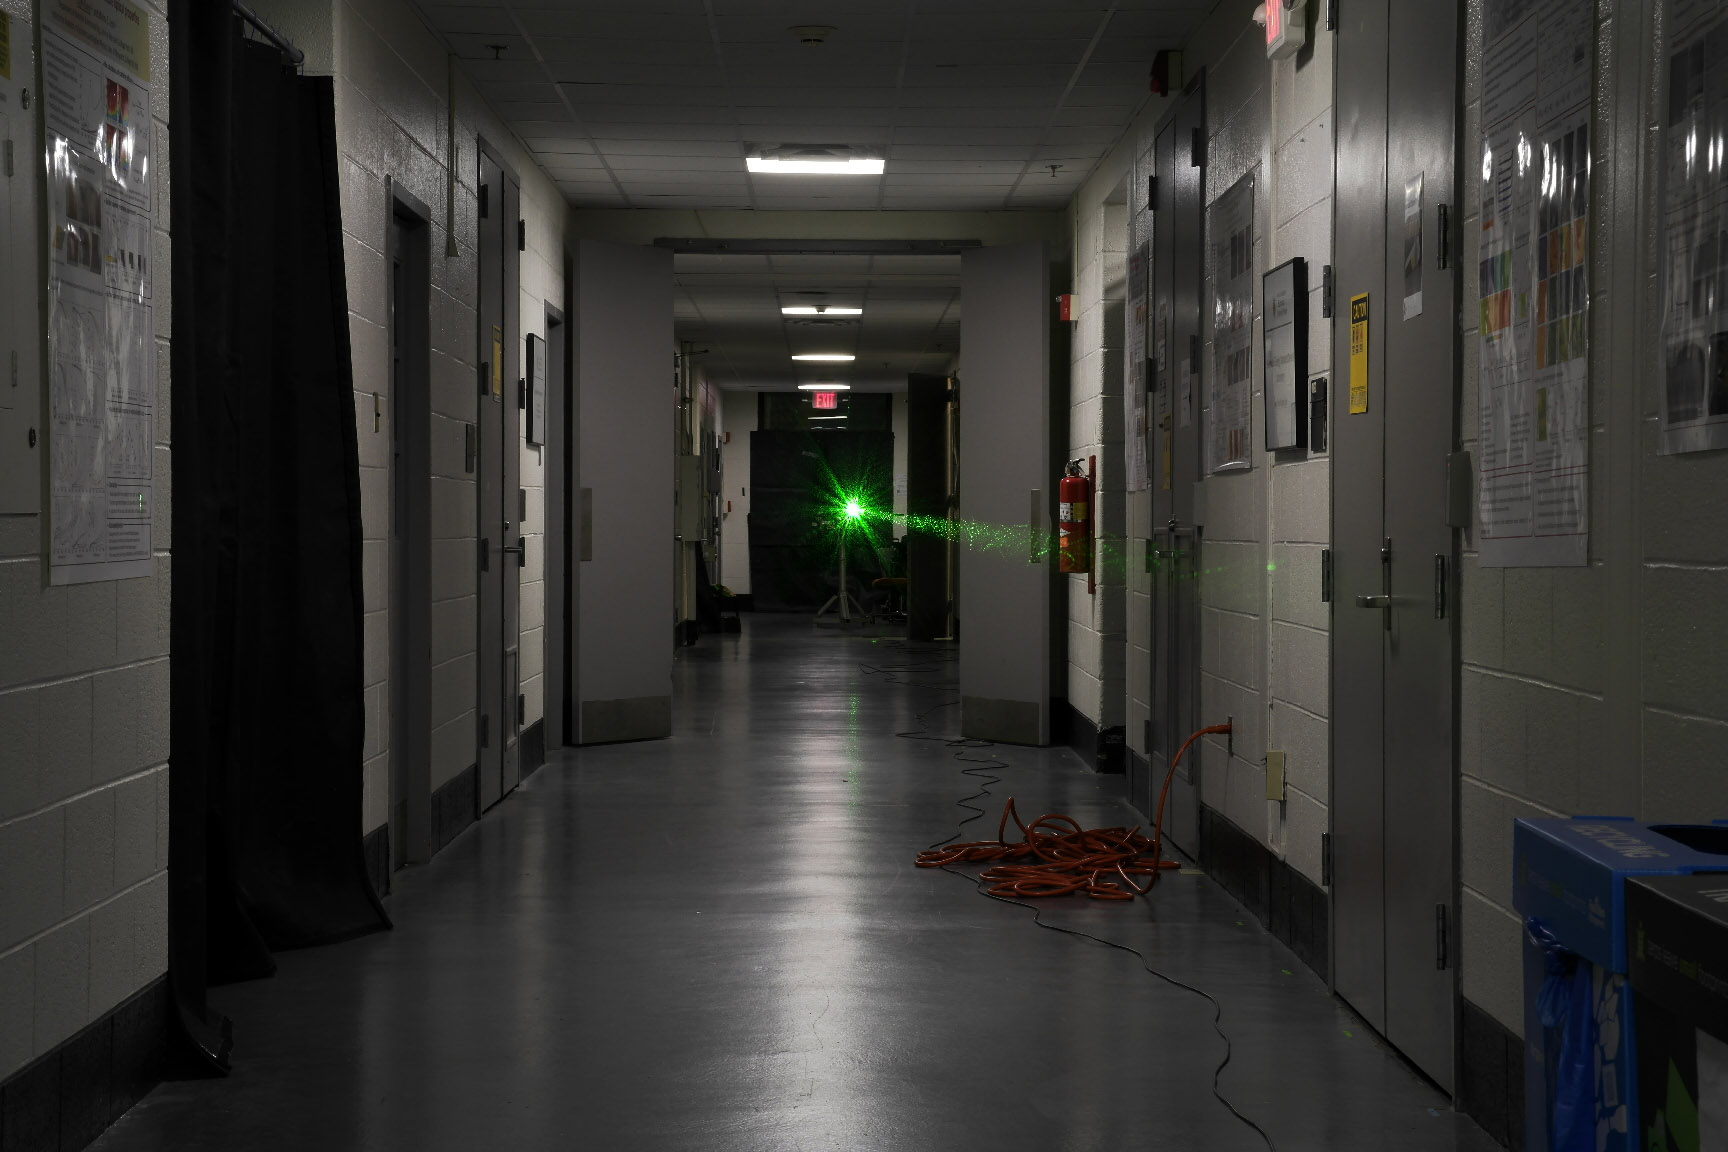 A laser is sent down a UMD hallway in an experiment to corral light as it makes a 45-meters-long journey.